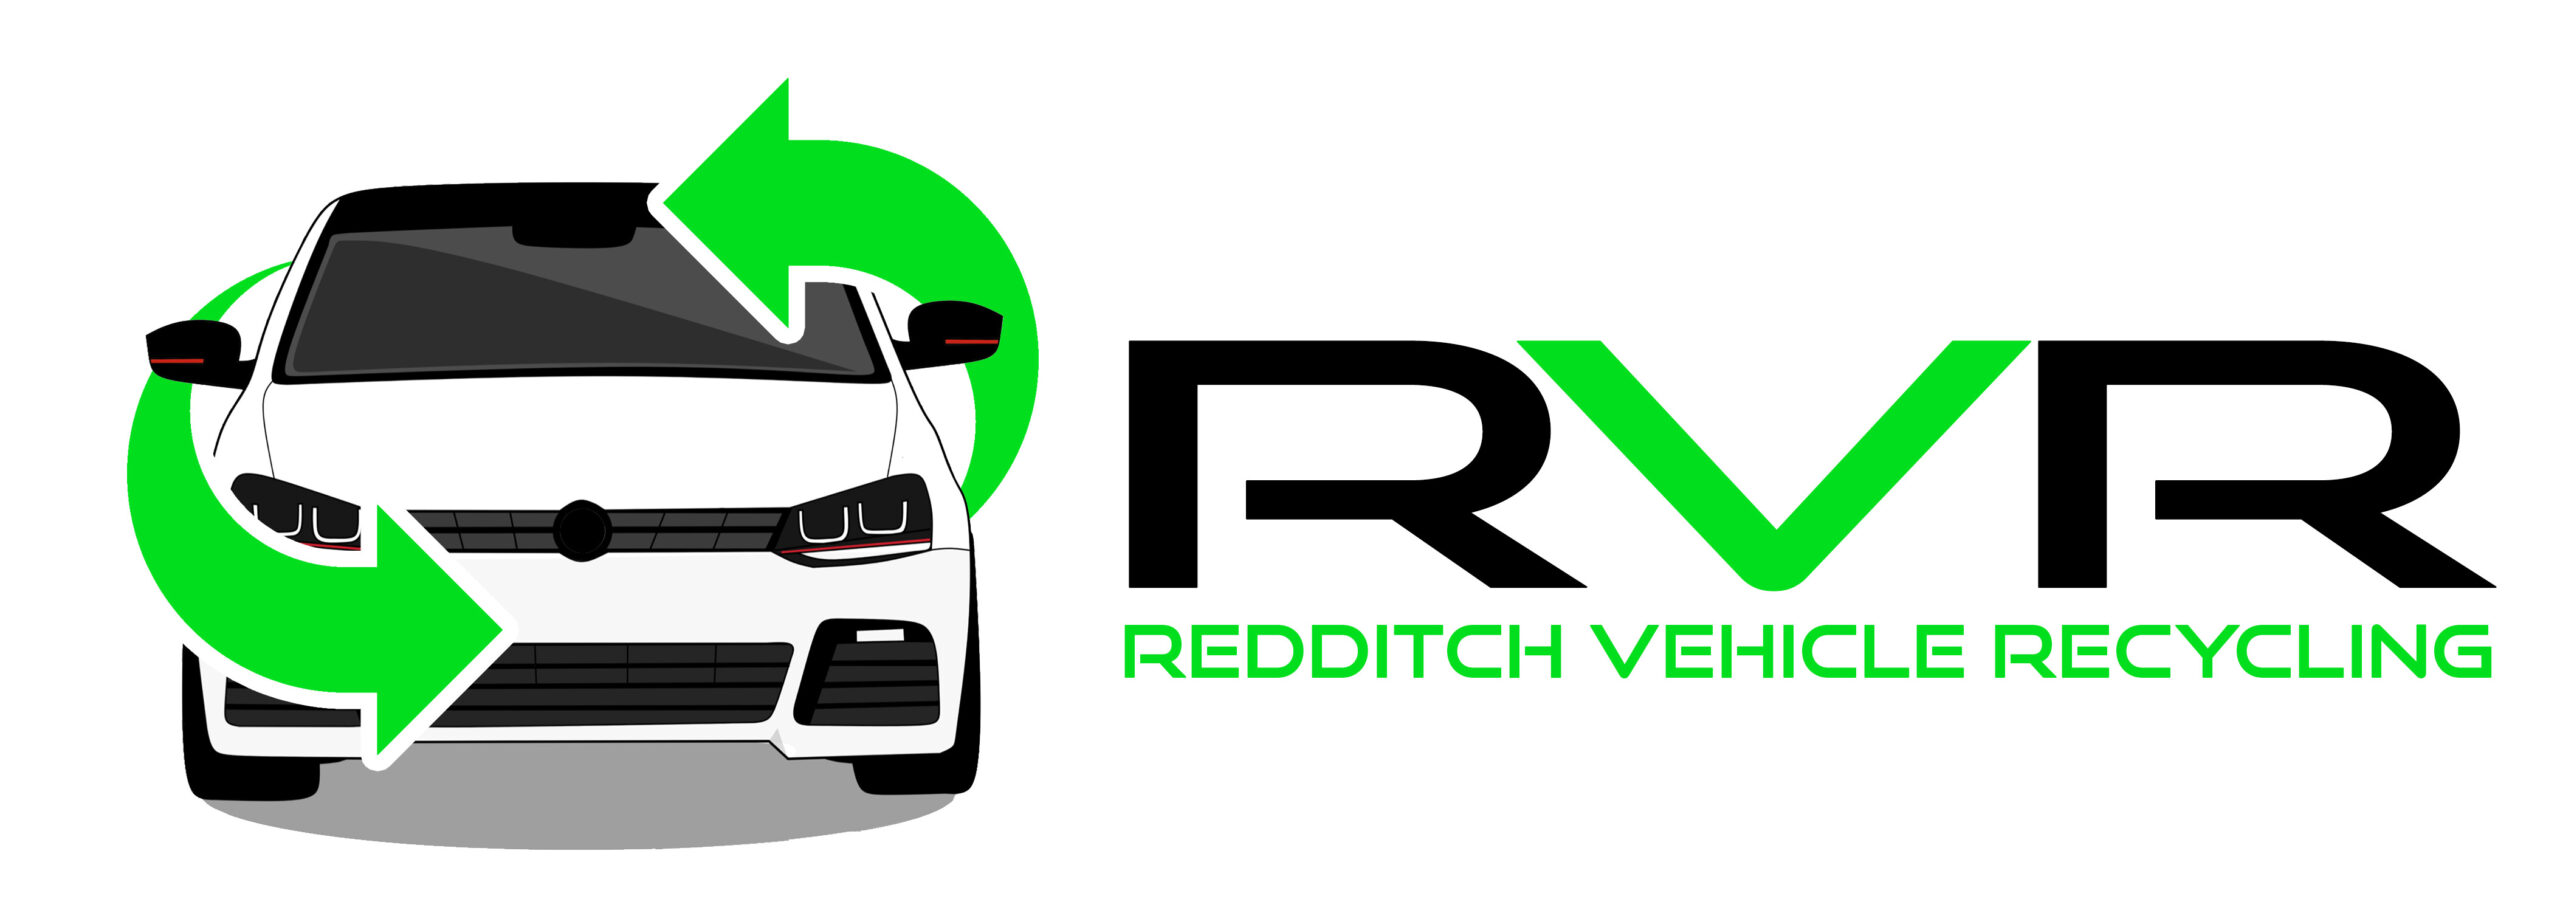 Redditch Vehicle Recycling